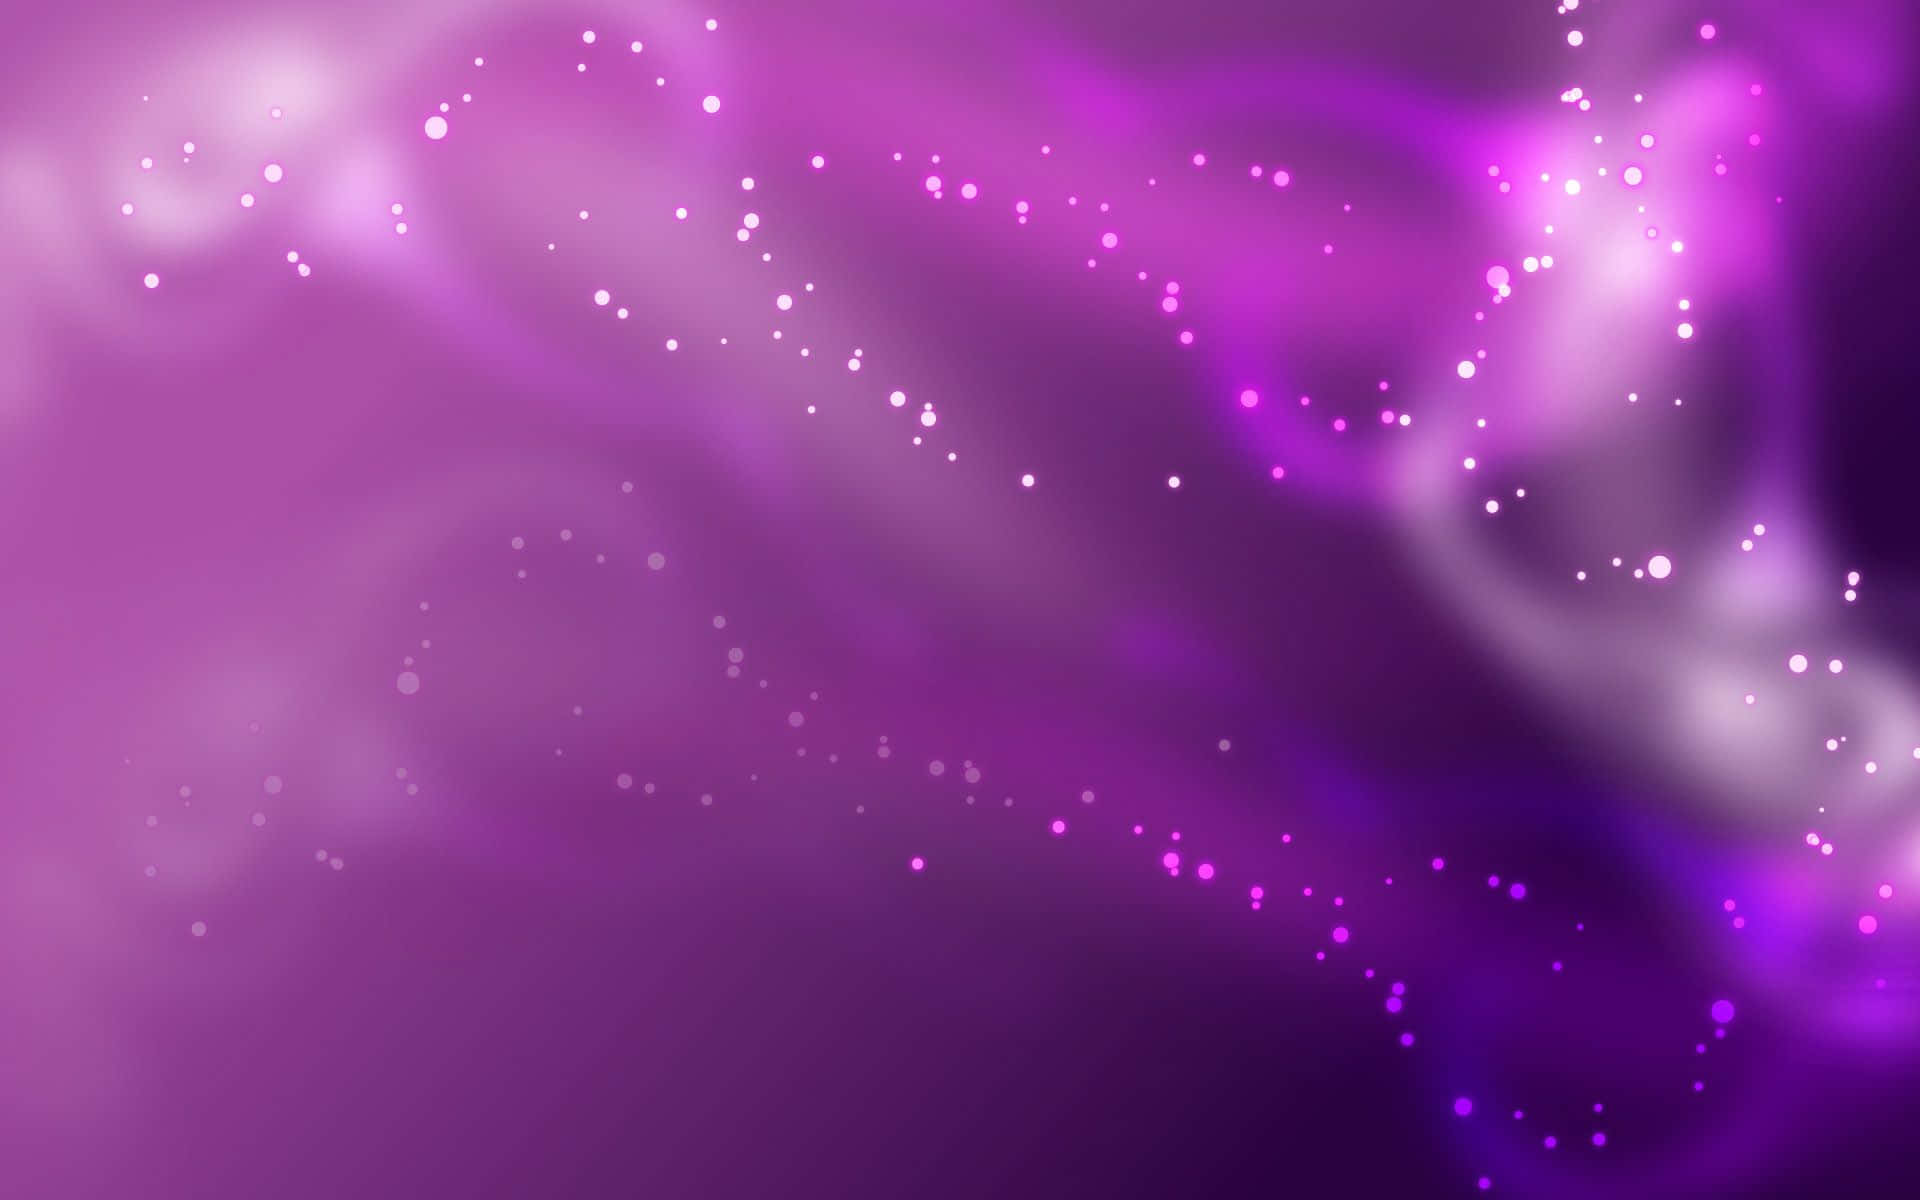 Purple And White Abstract Background With Stars Wallpaper